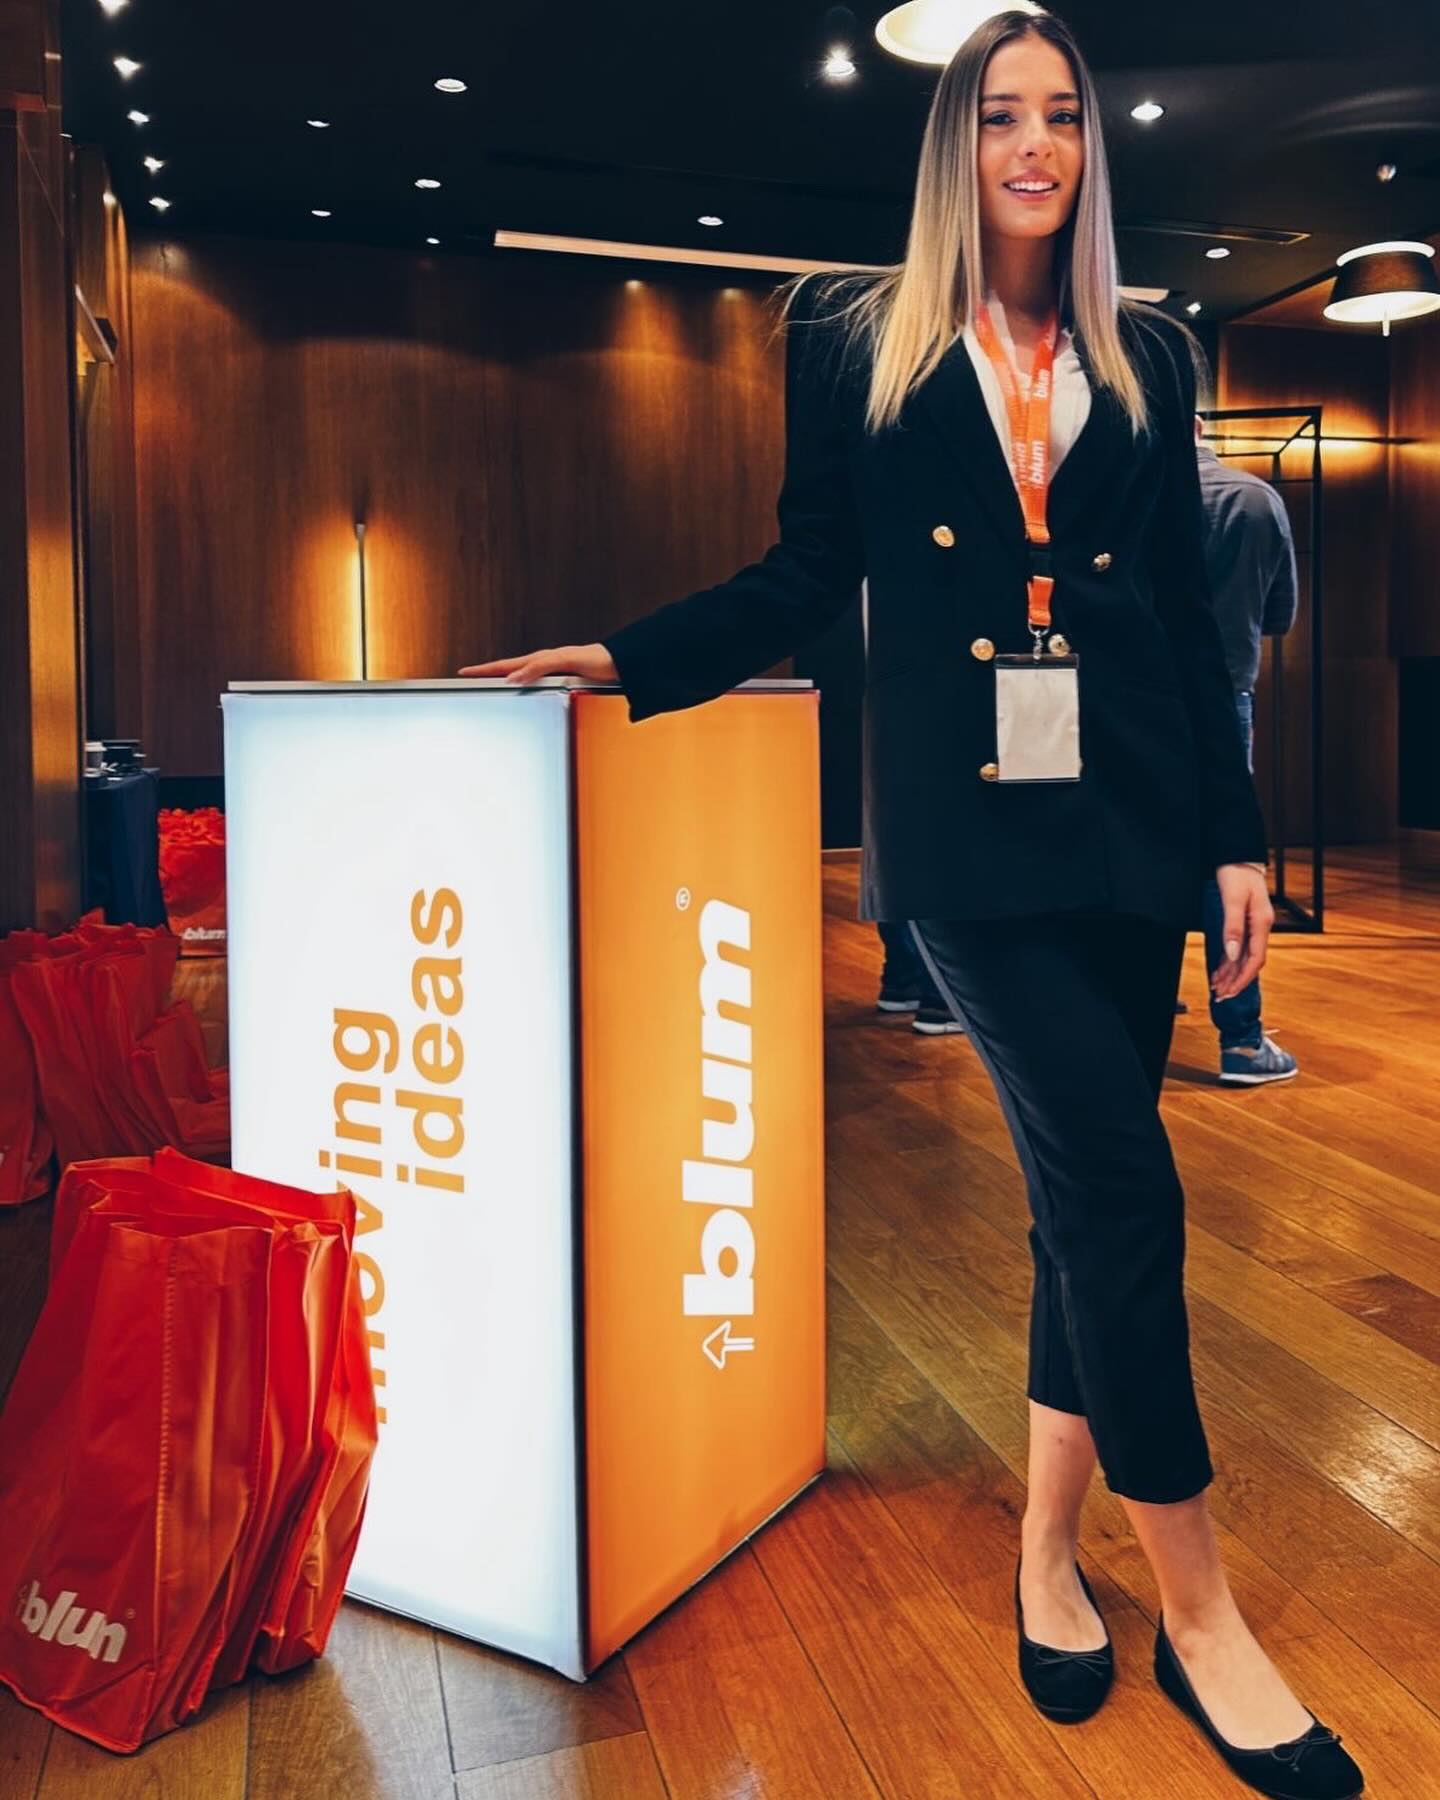 Promotional event for Blum Hellas